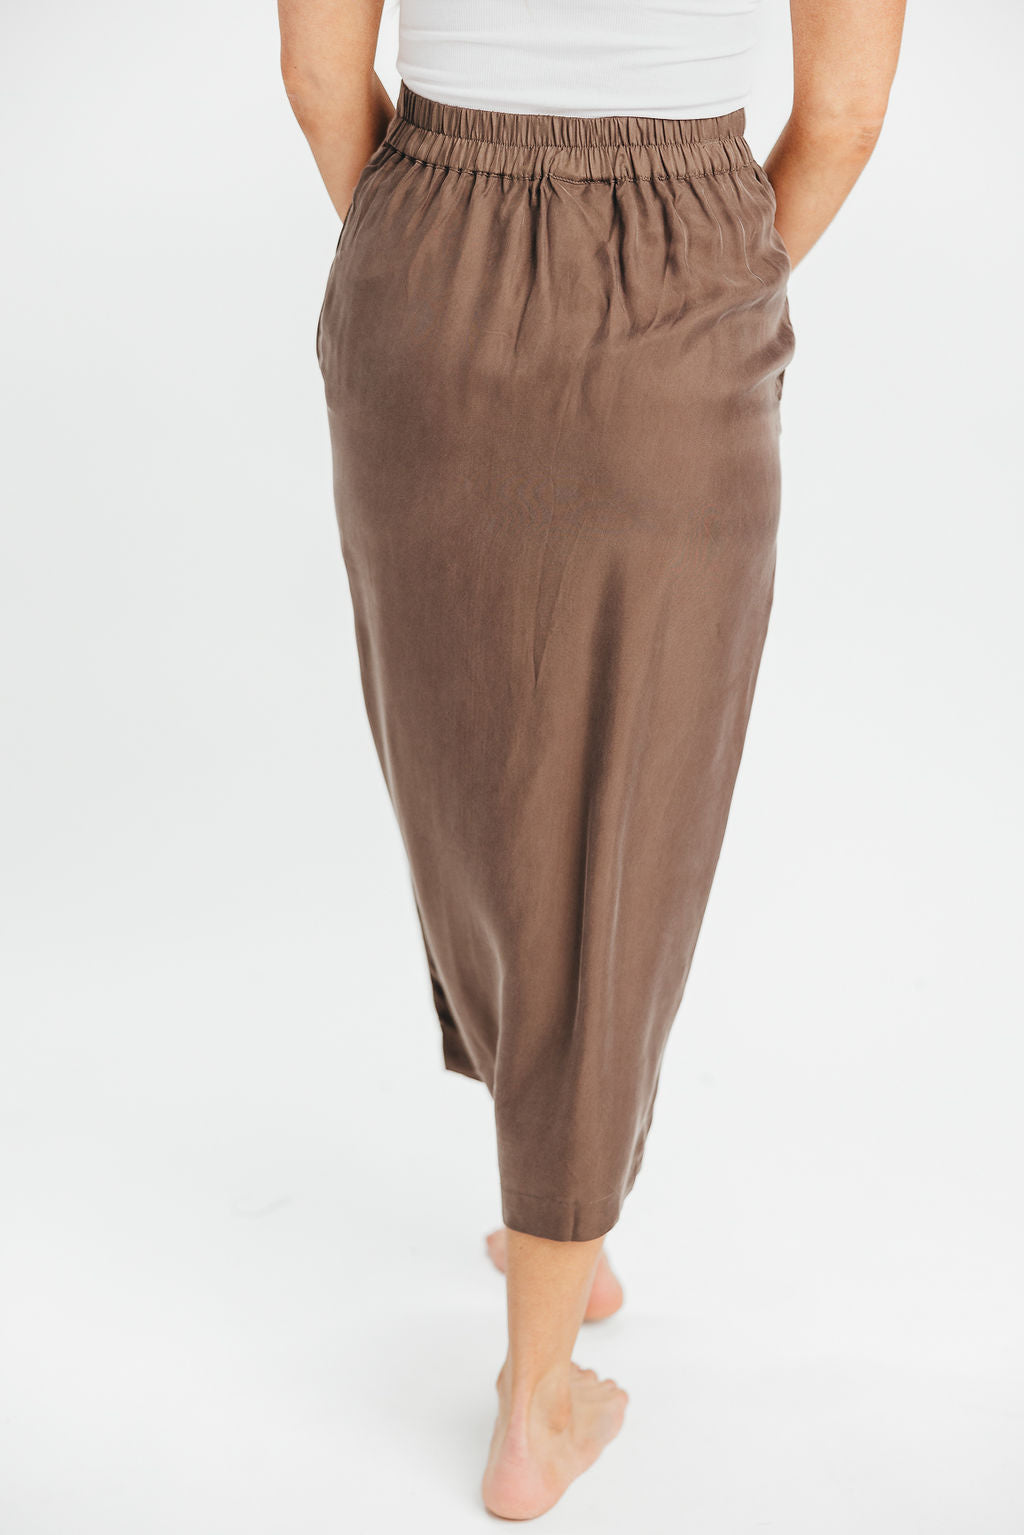 Better Days Button-Down Midi Cargo Skirt in Olive